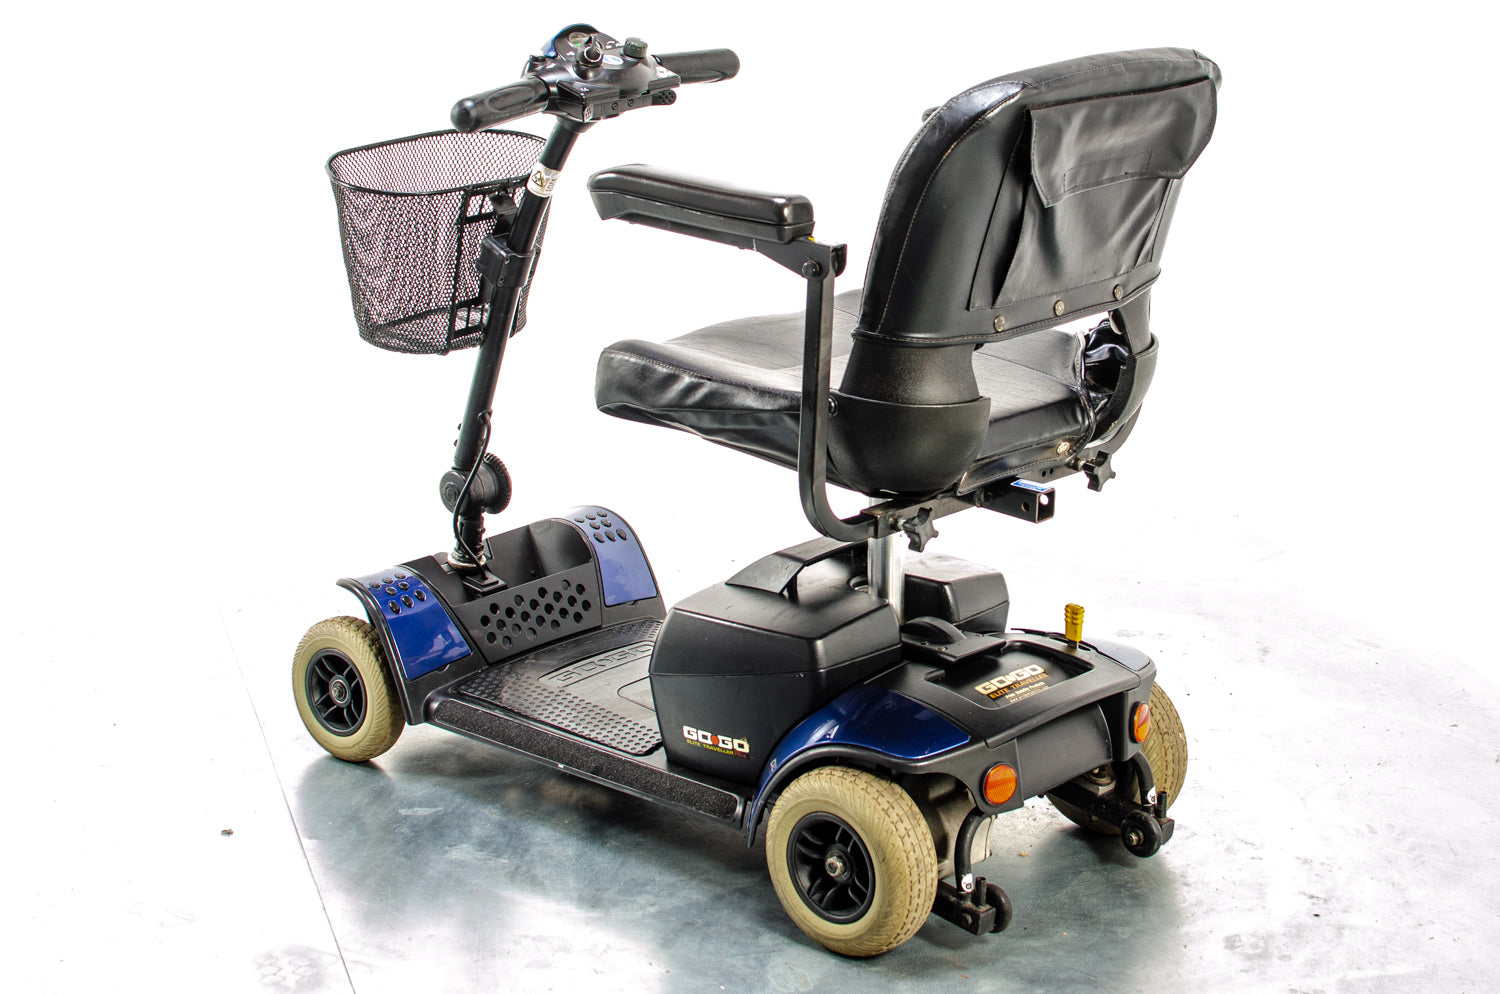 Pride Go-Go Elite Traveller Plus Used Mobility Scooter Small Transportable Lightweight Travel Car